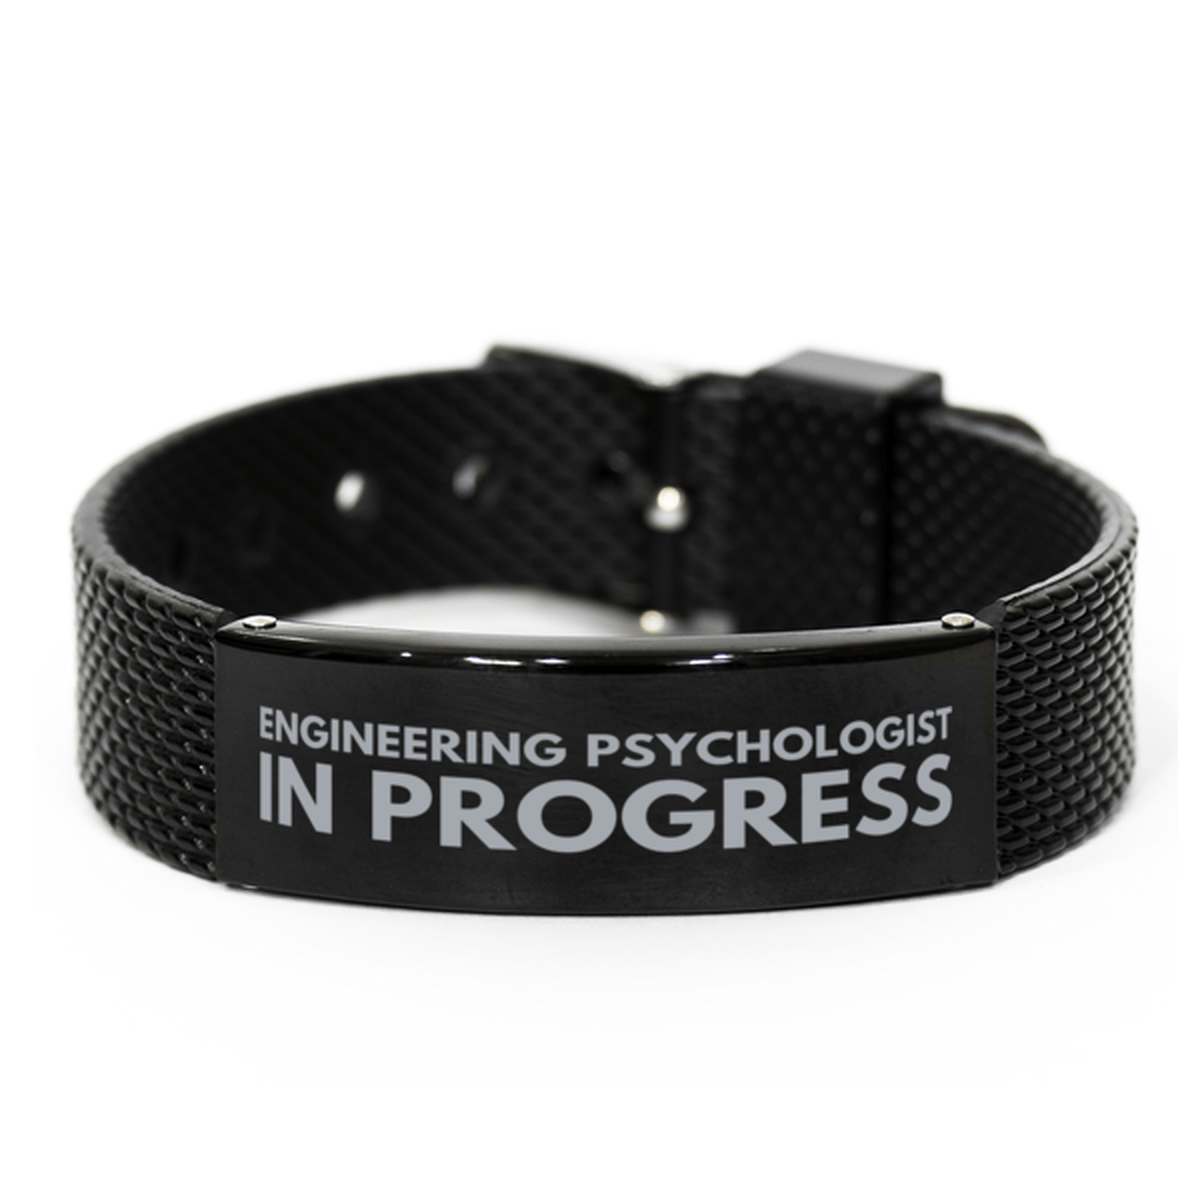 Inspirational Engineering Psychologist Black Shark Mesh Bracelet, Engineering Psychologist In Progress, Best Graduation Gifts for Students